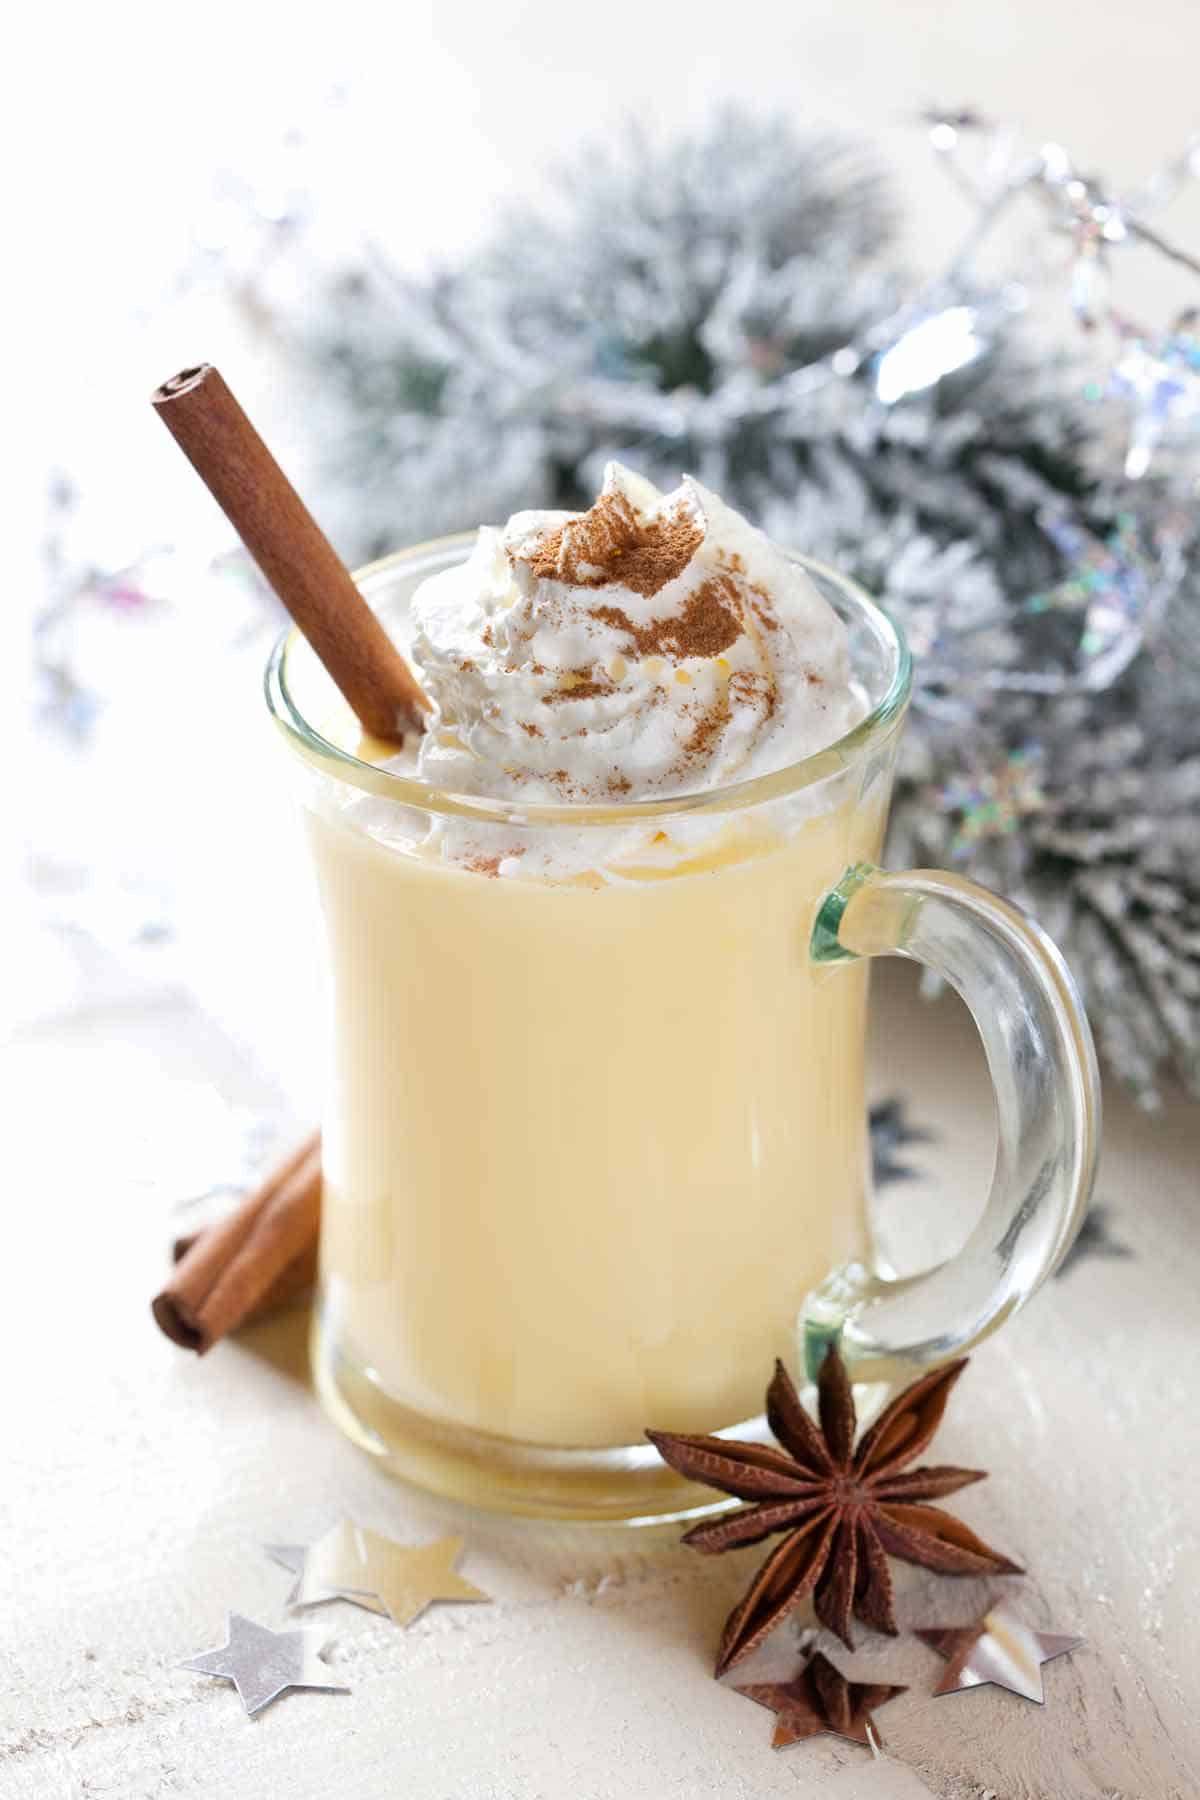 Glass on eggnog with whipped cream and a cinnamon stick.